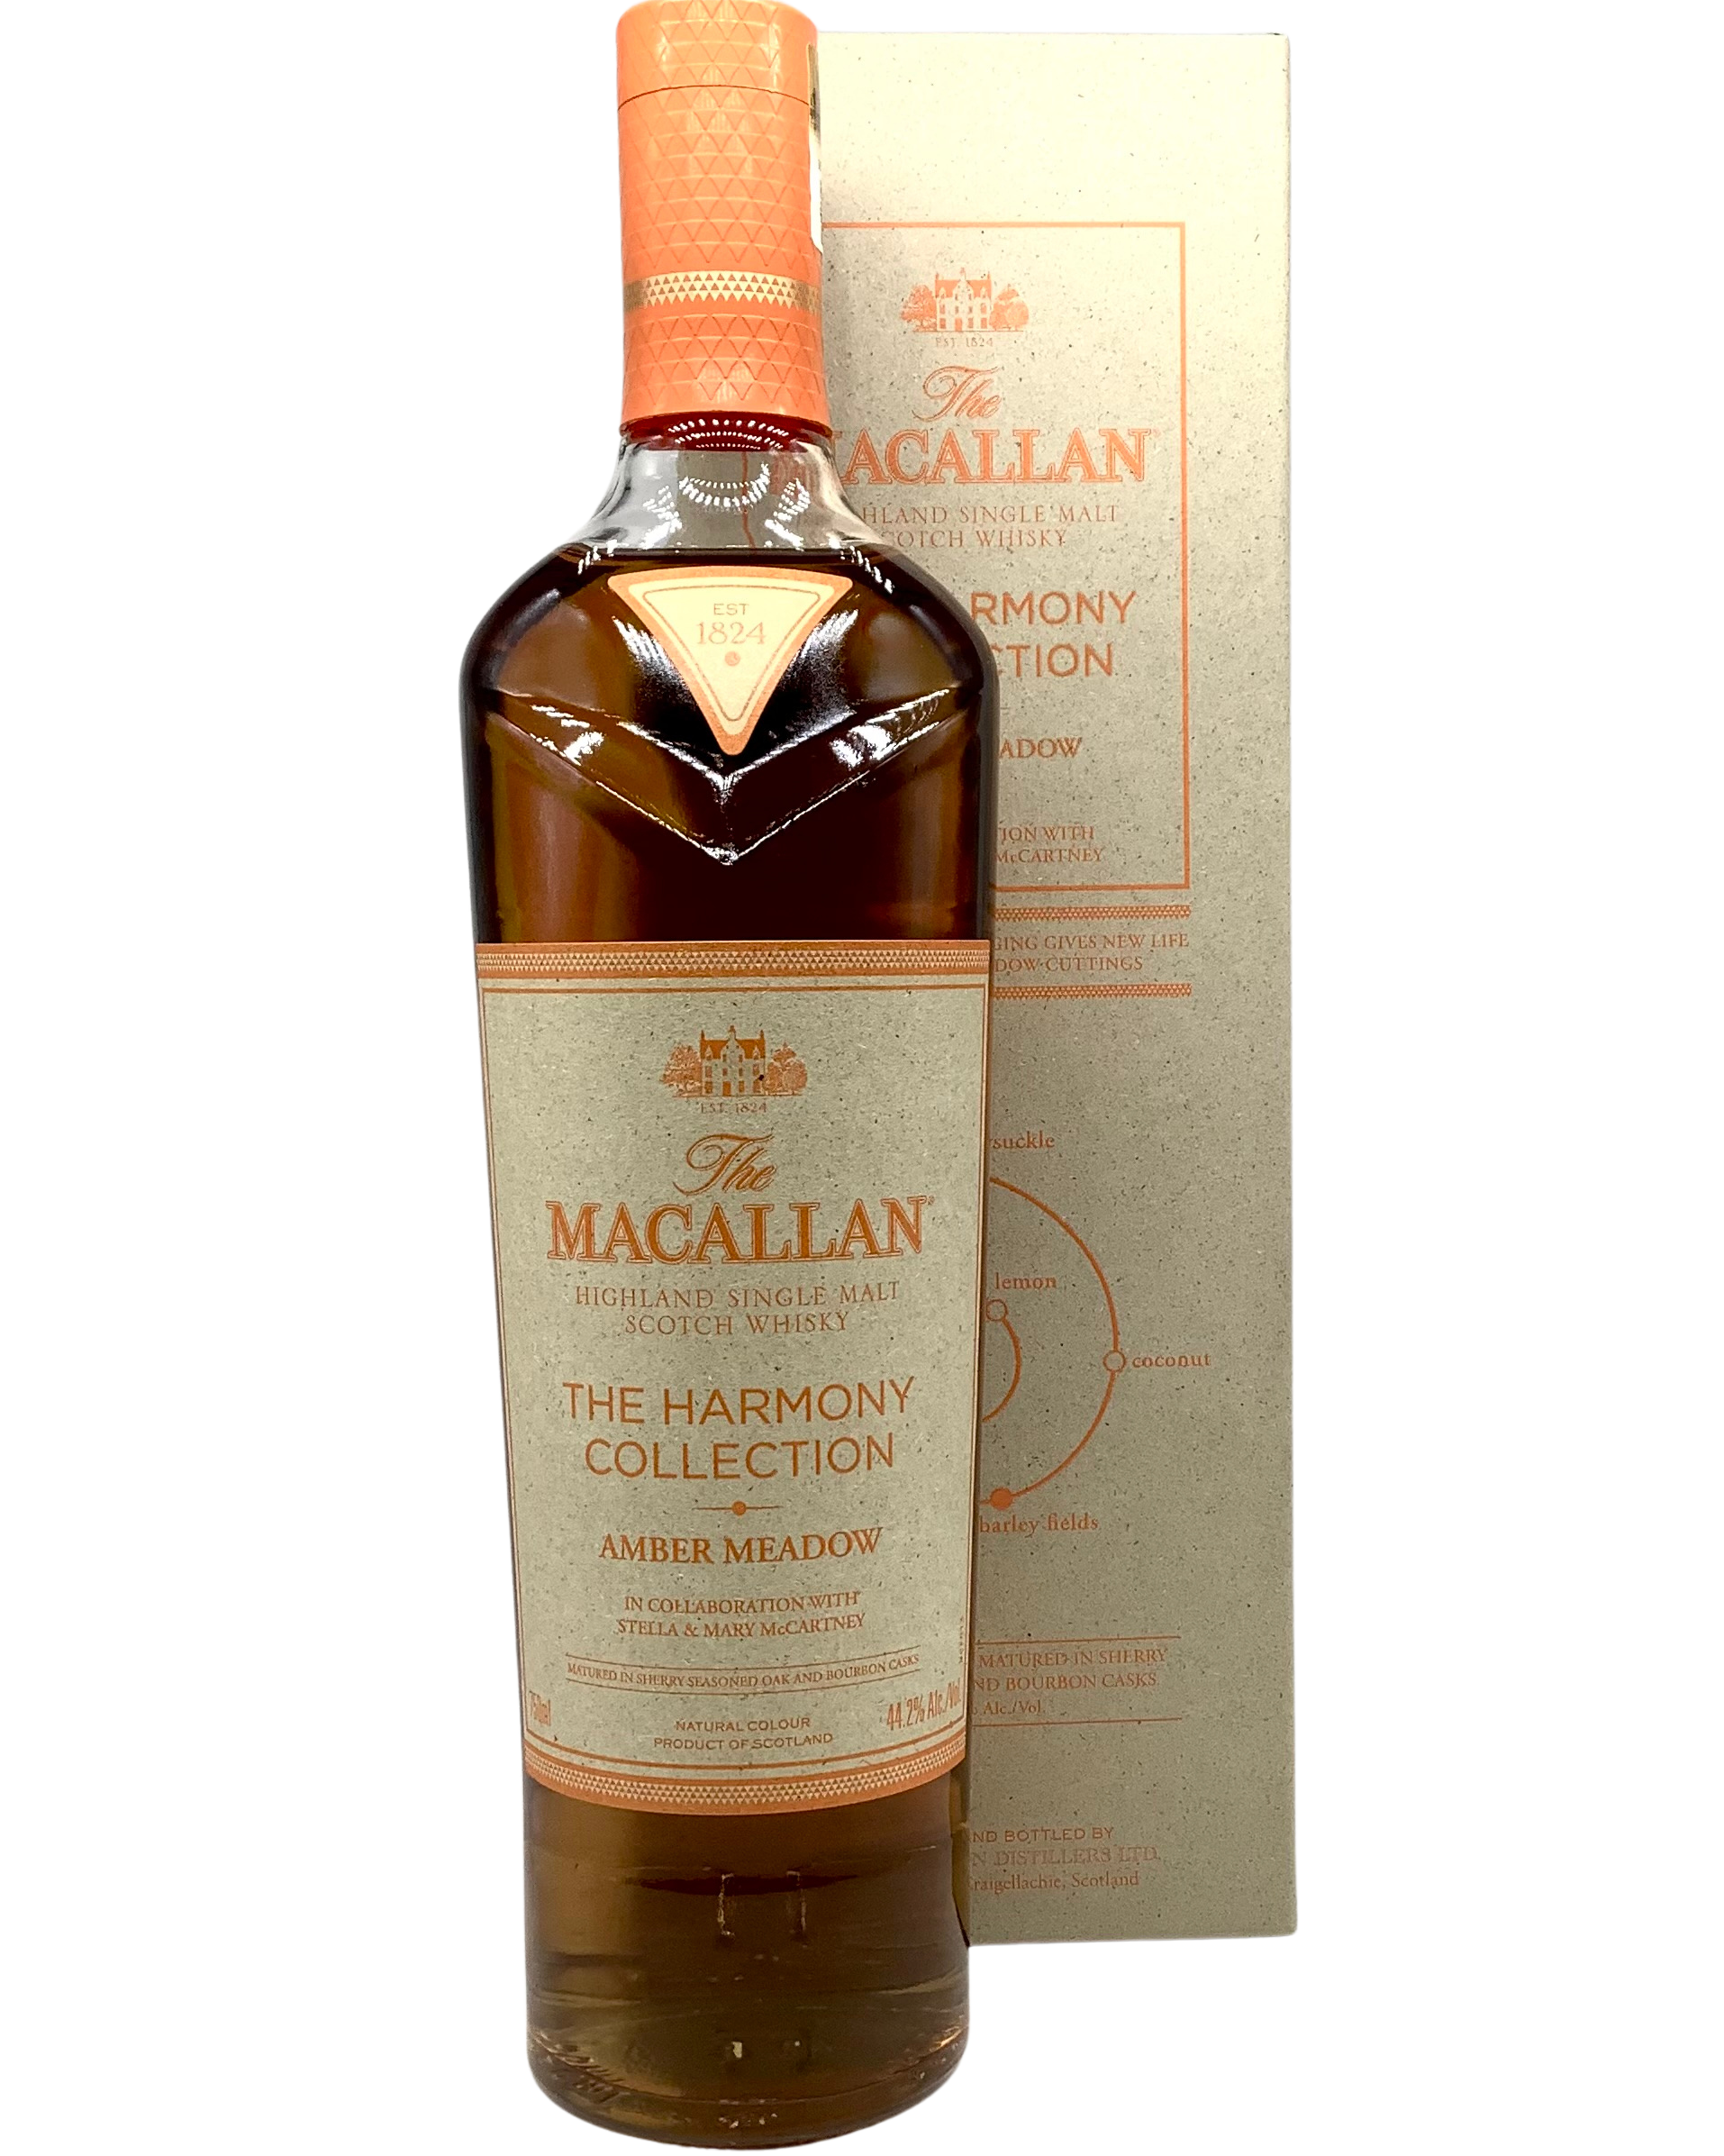 The Macallan Harmony Collection "Amber Meadow" Highland Single Malt Scotch Whisky 750ml newarrival